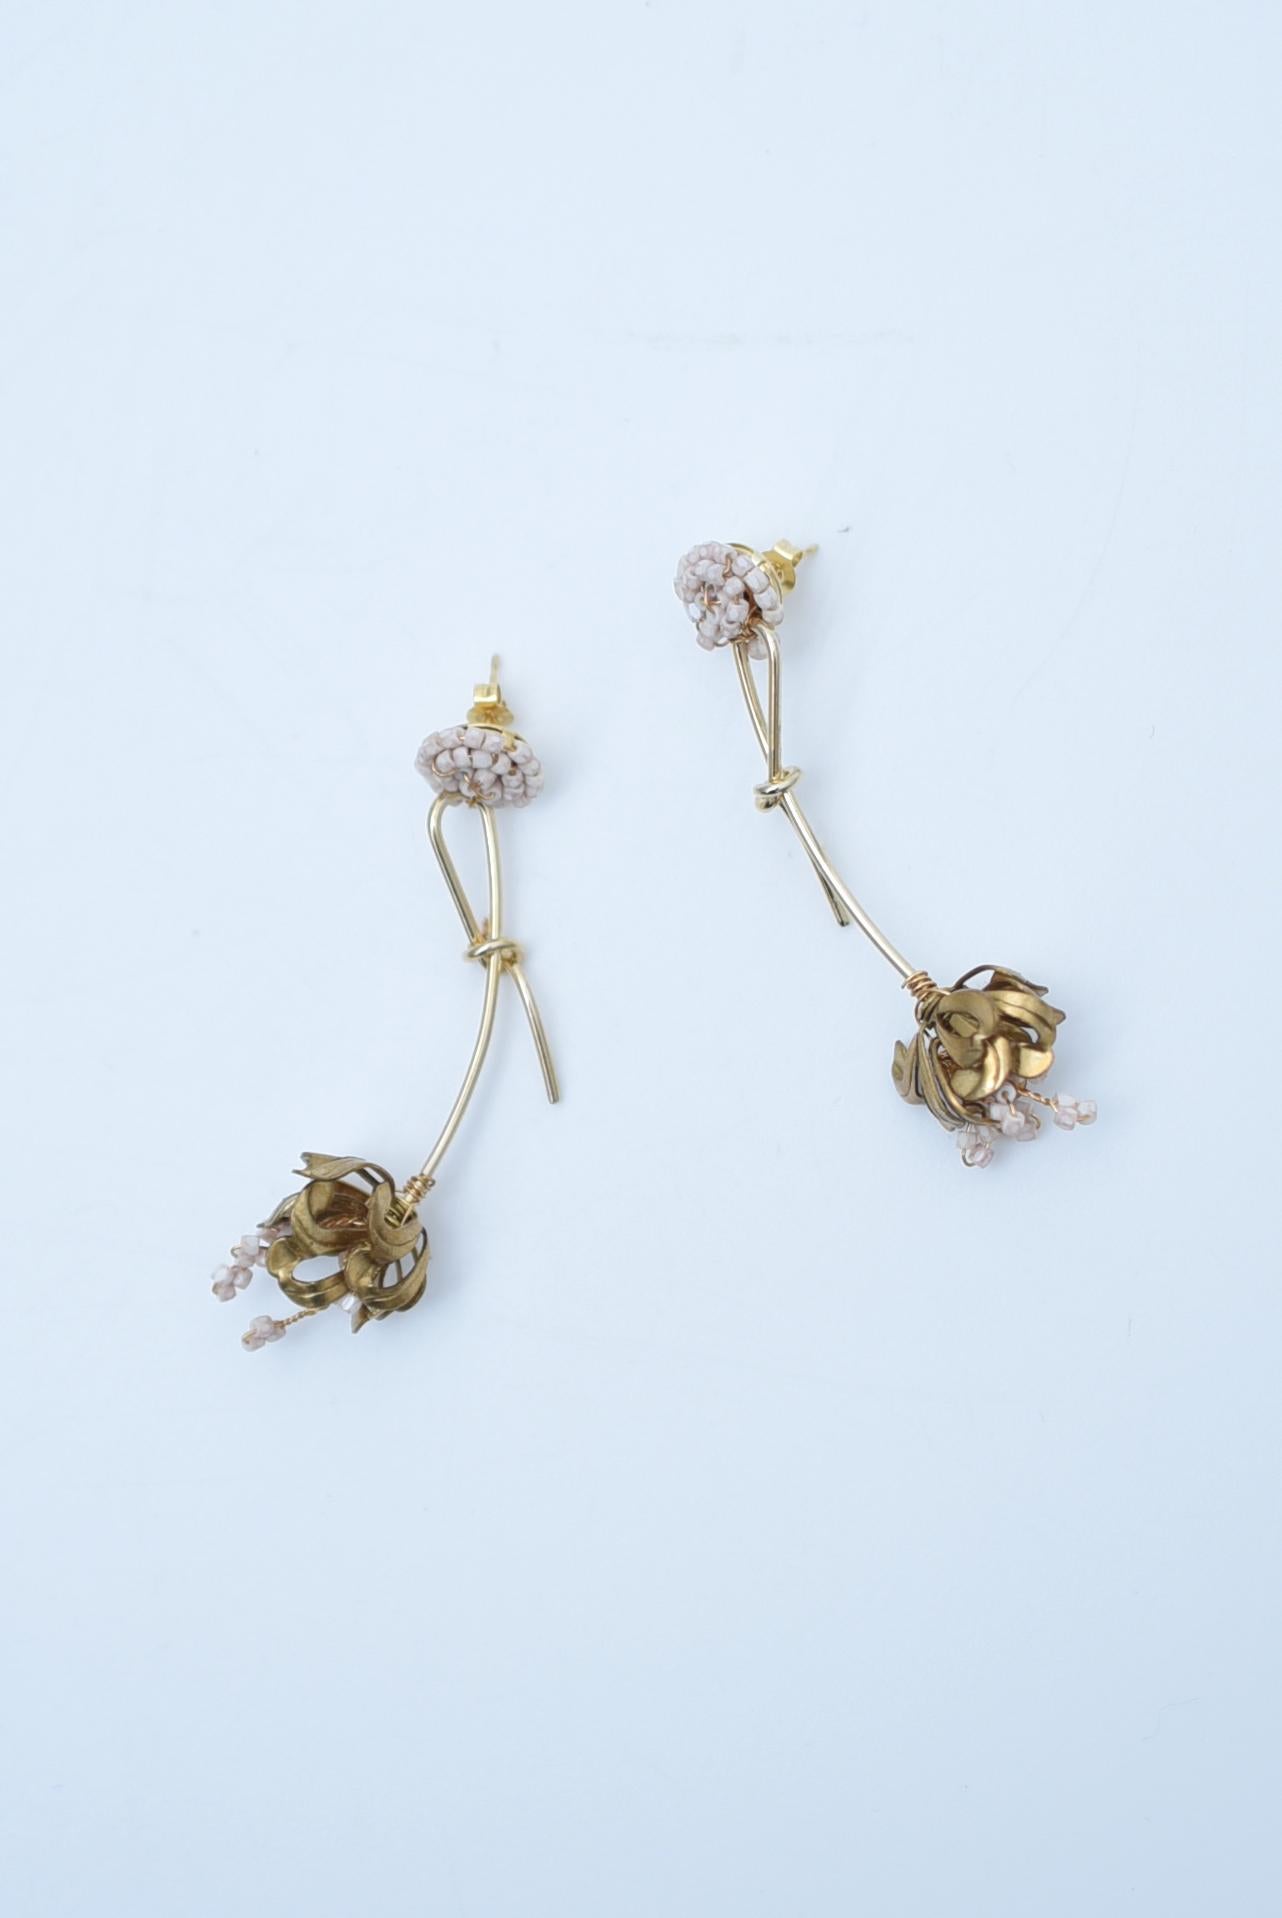 material:Brass, Vintage 1970s Japanese glass pearls,swarovski,1970s vintage parts, stainless
size:length 5.5cm


Lovely earrings with a ribbon tied around the earring.
The ribbon is fixed to the top and does not swing widely, so there is no risk of